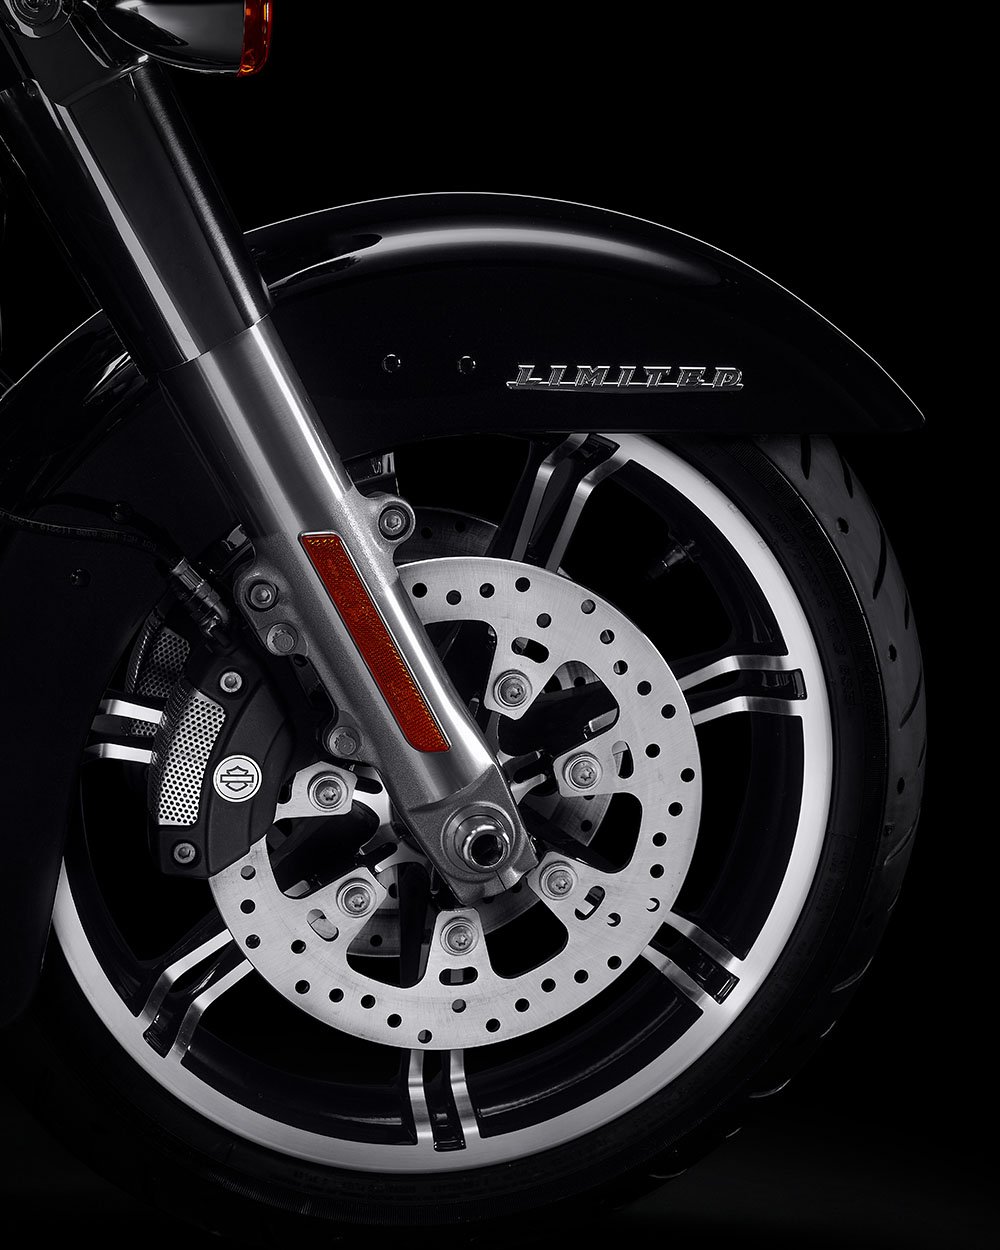 Roue d’une motocyclette Ultra Limited 2022